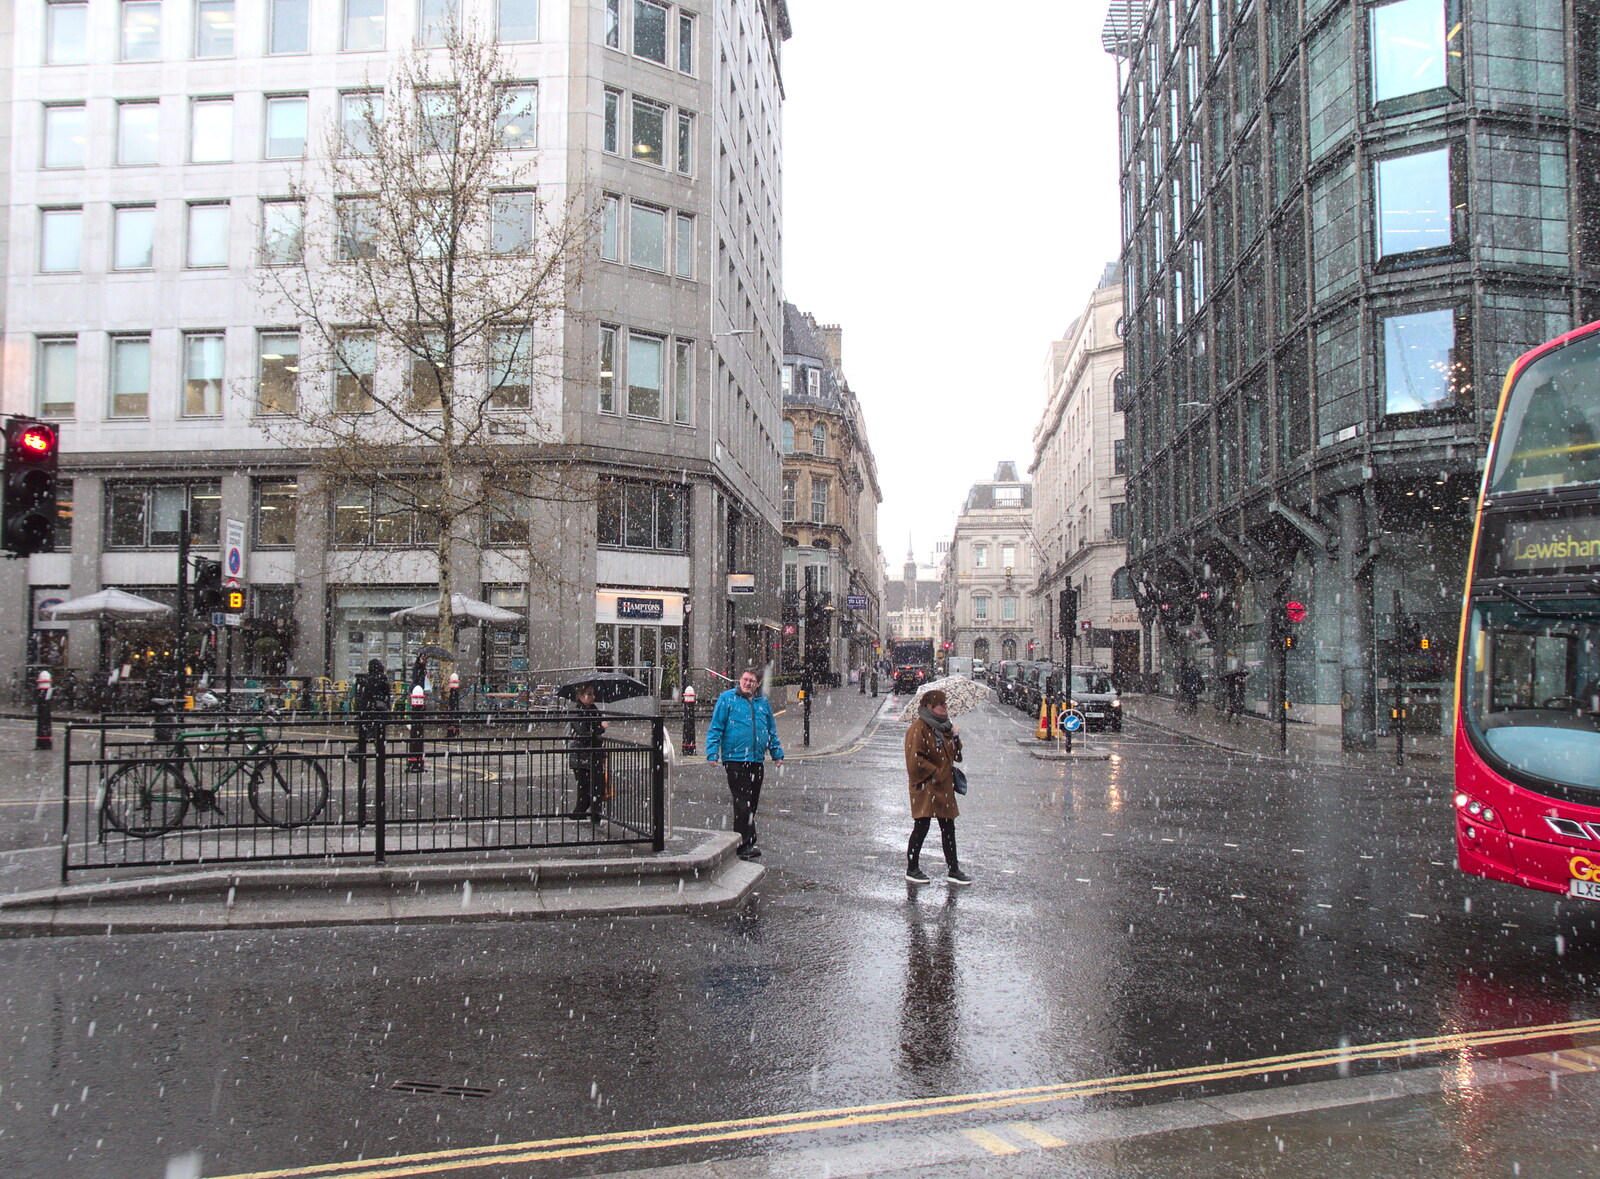 The hail and sleet comes down on Victoria Street from An April Miscellany: Snow and Cycling, Suffolk and London - 4th April 2019